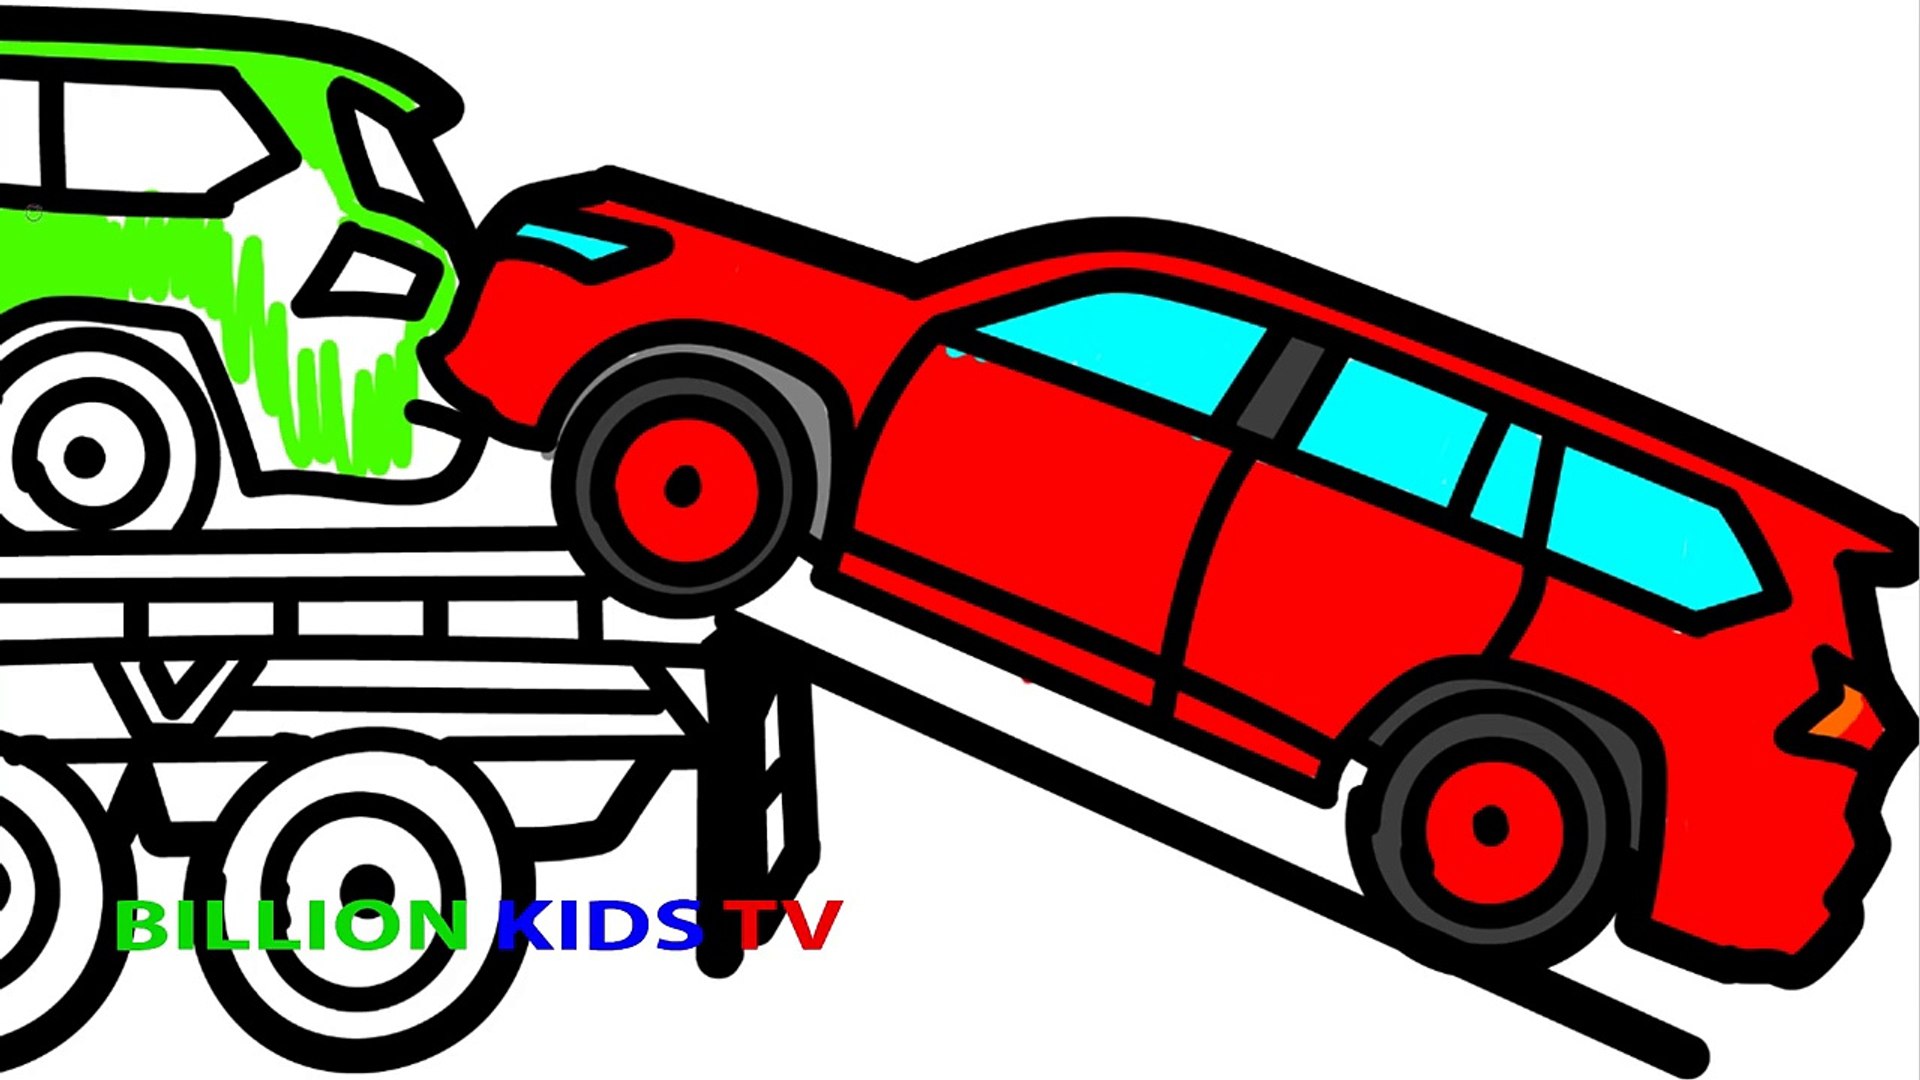 SUV CARS Transportation Coloring Book Coloring Pages Kids Fun Art Activities Video For Kids